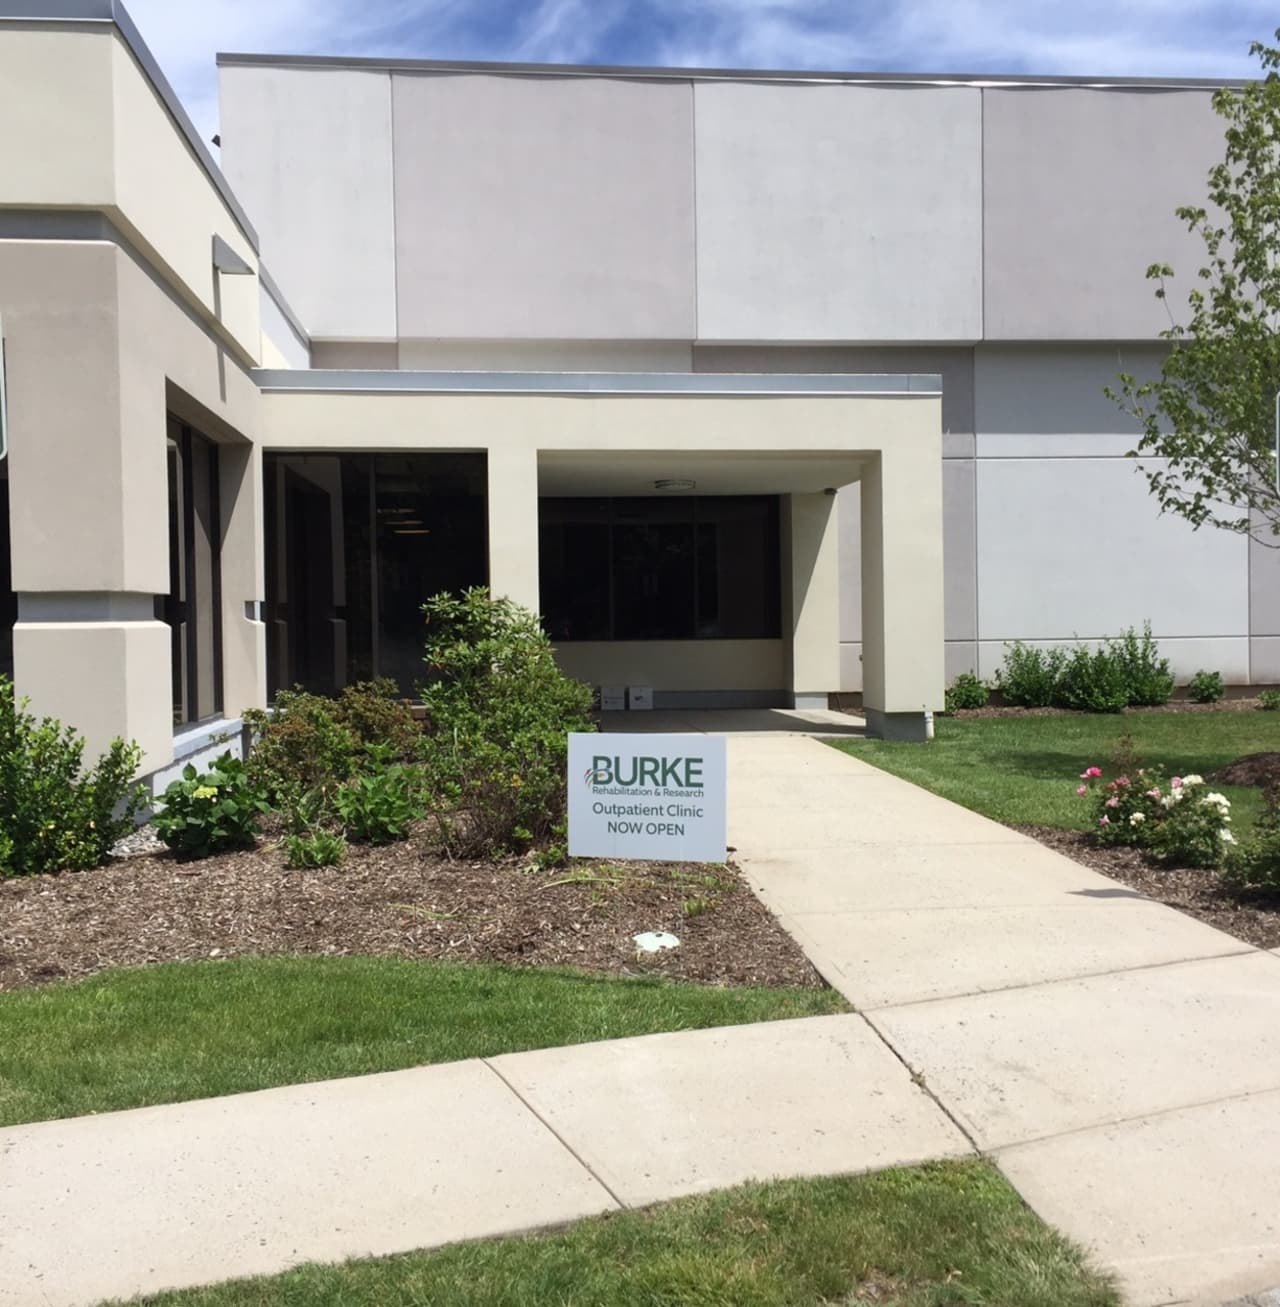 Burke Rehabilitation Hospital recently opened a new office in Armonk.